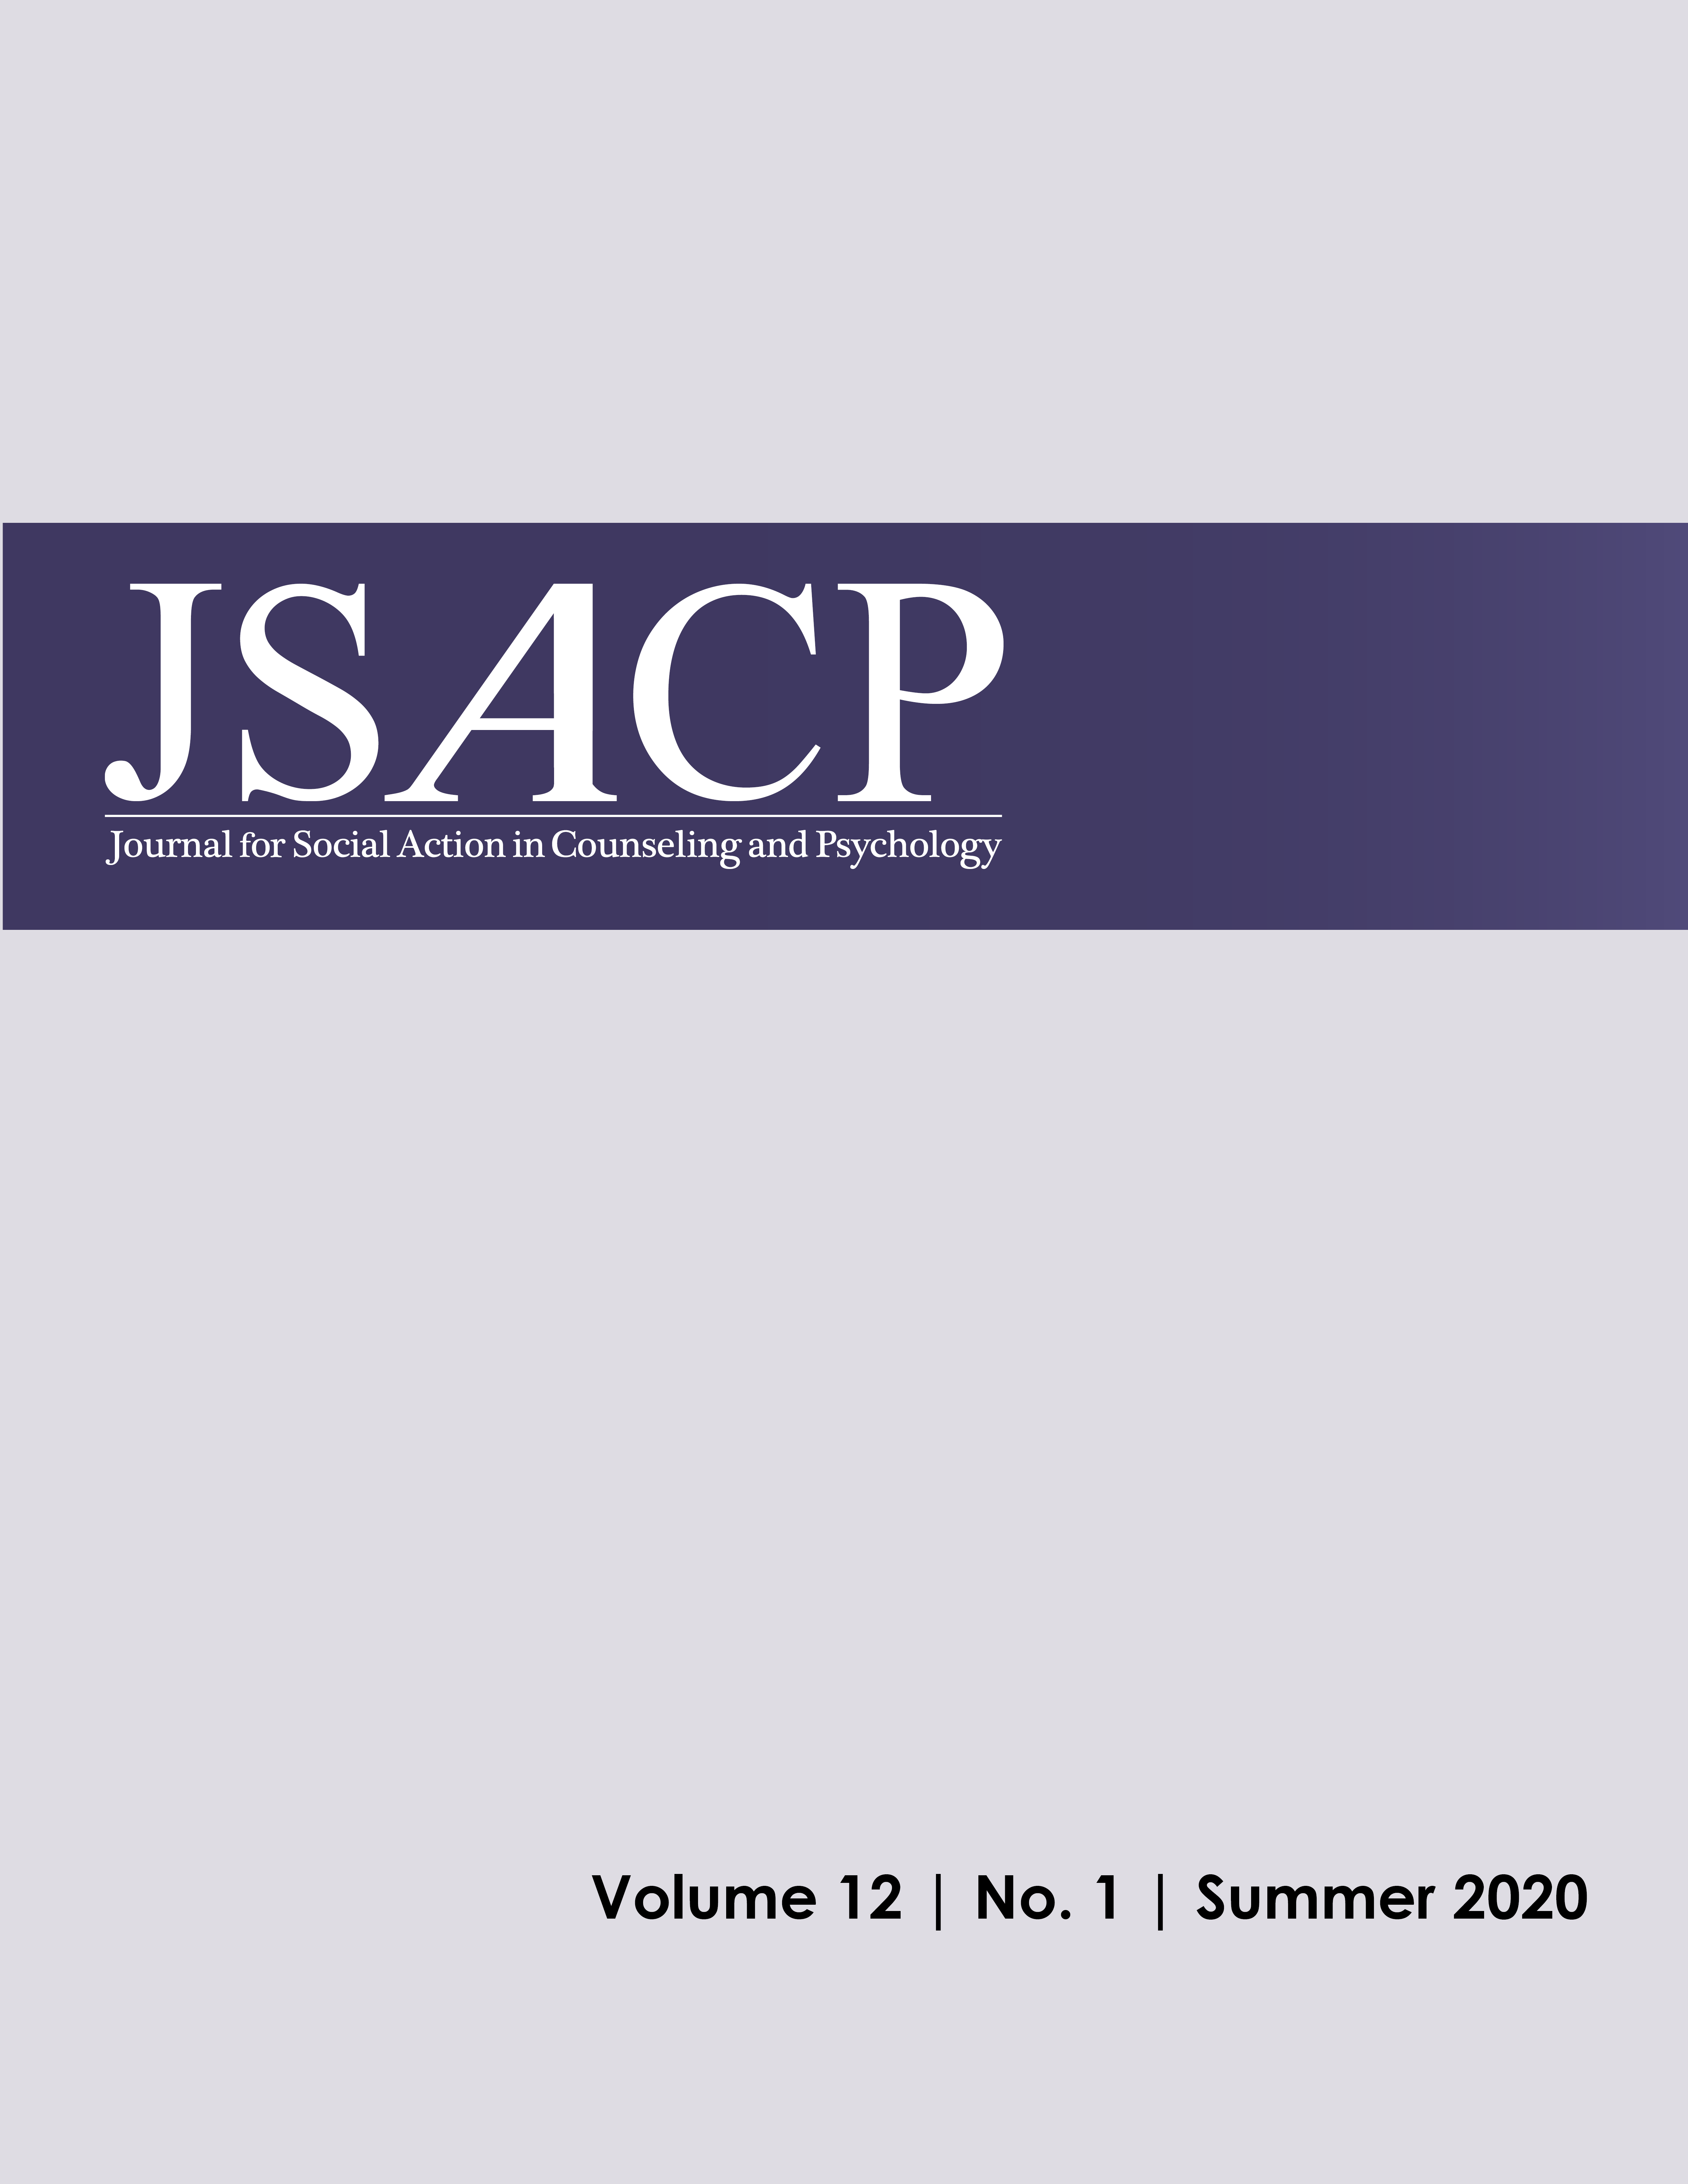 					View Vol. 12 No. 1 (2020): Journal for Social Action in Counseling and Psychology, Summer 2020
				